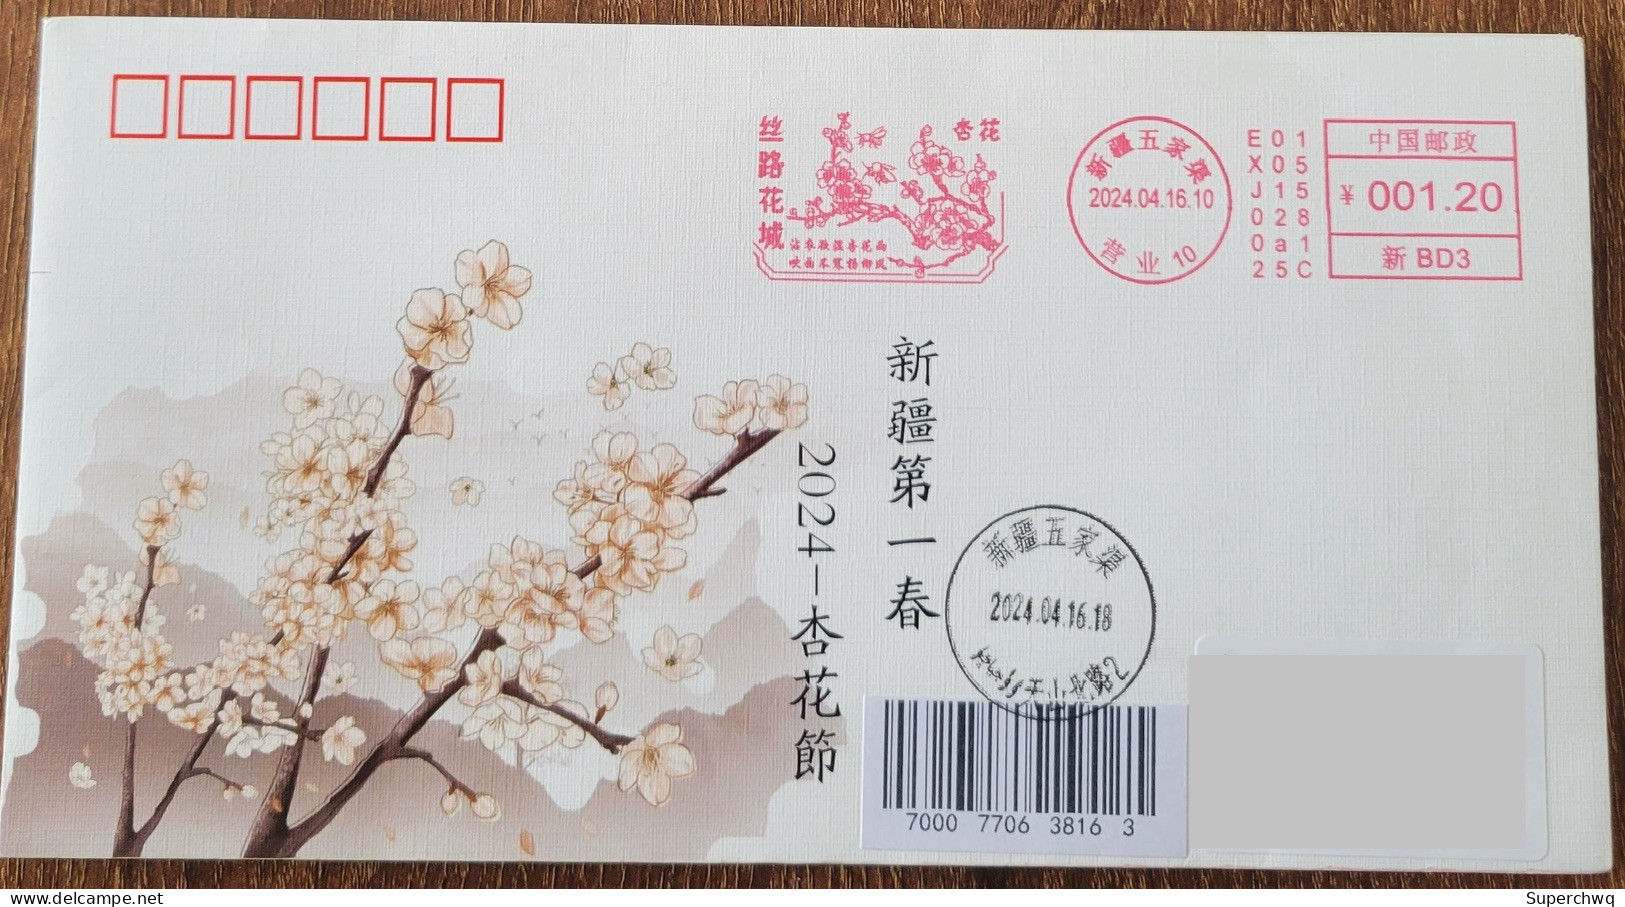 China Cover "Silk Road Flower City~Apricot Blossoms" (Wujiaqu, Xinjiang) Postage Machine Stamped First Day Actual Delive - Buste